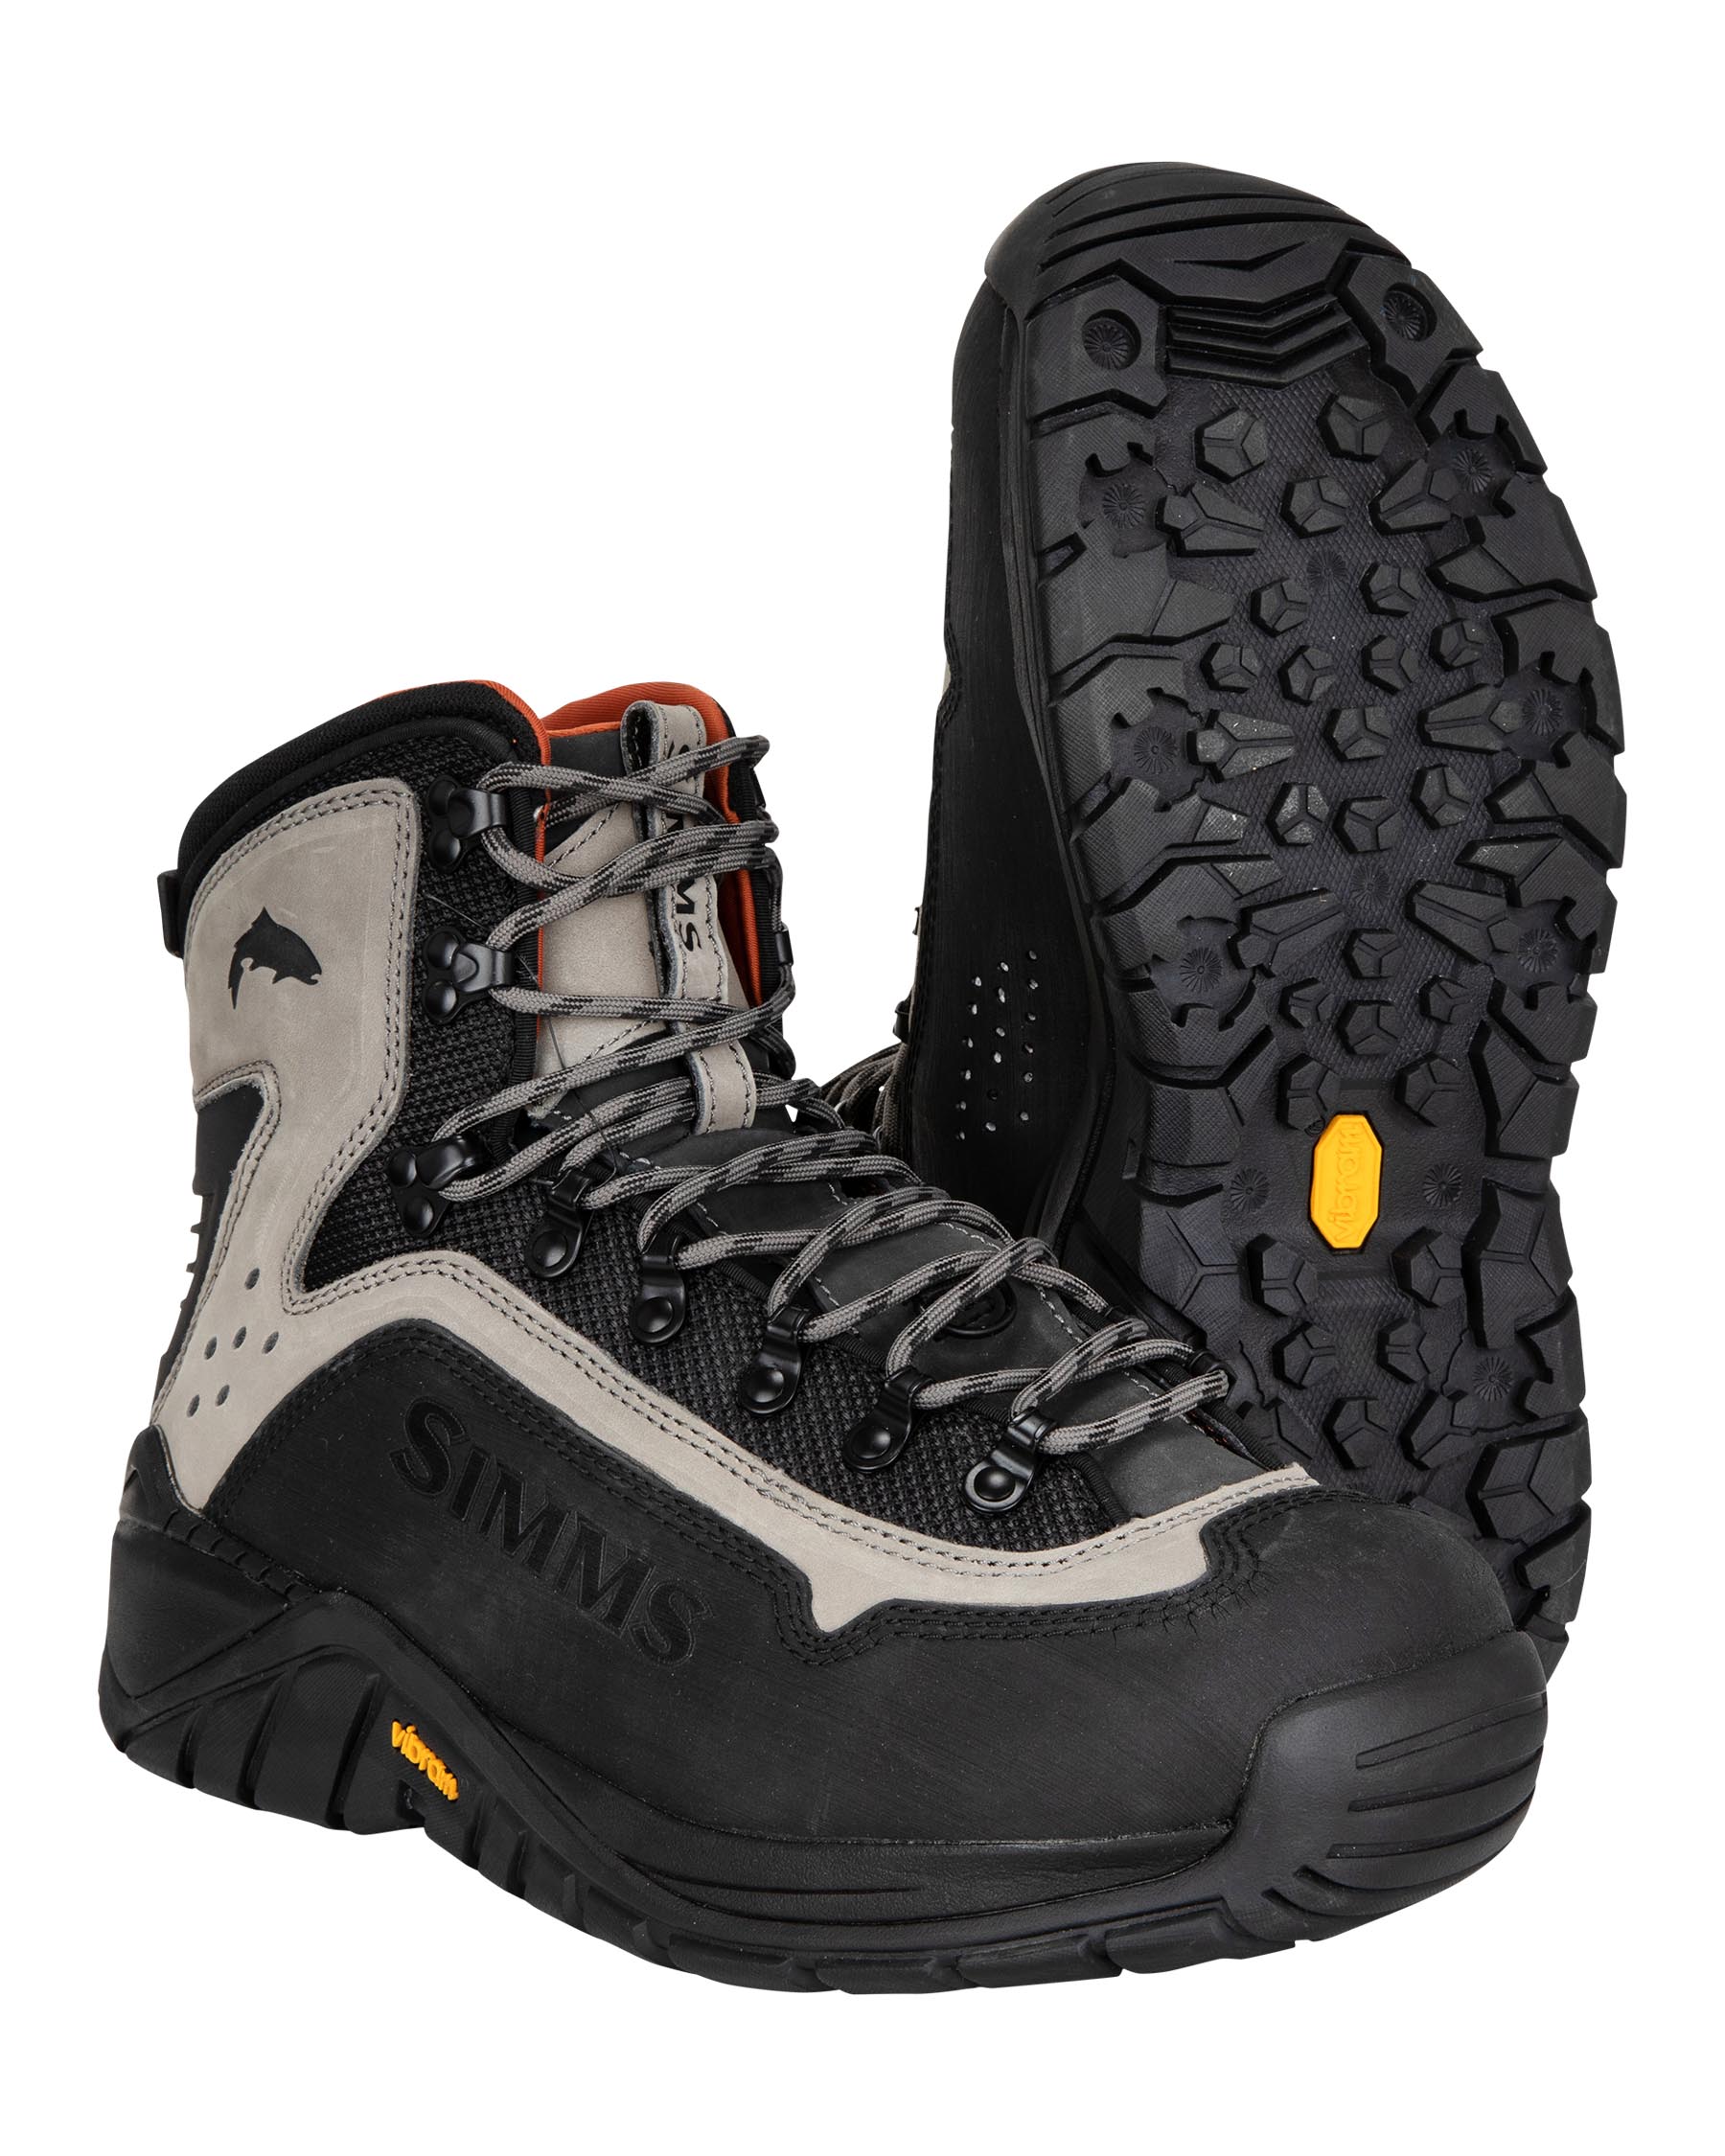 OLD Simms Men's G3 Guide Wading Boots - Vibram Soles